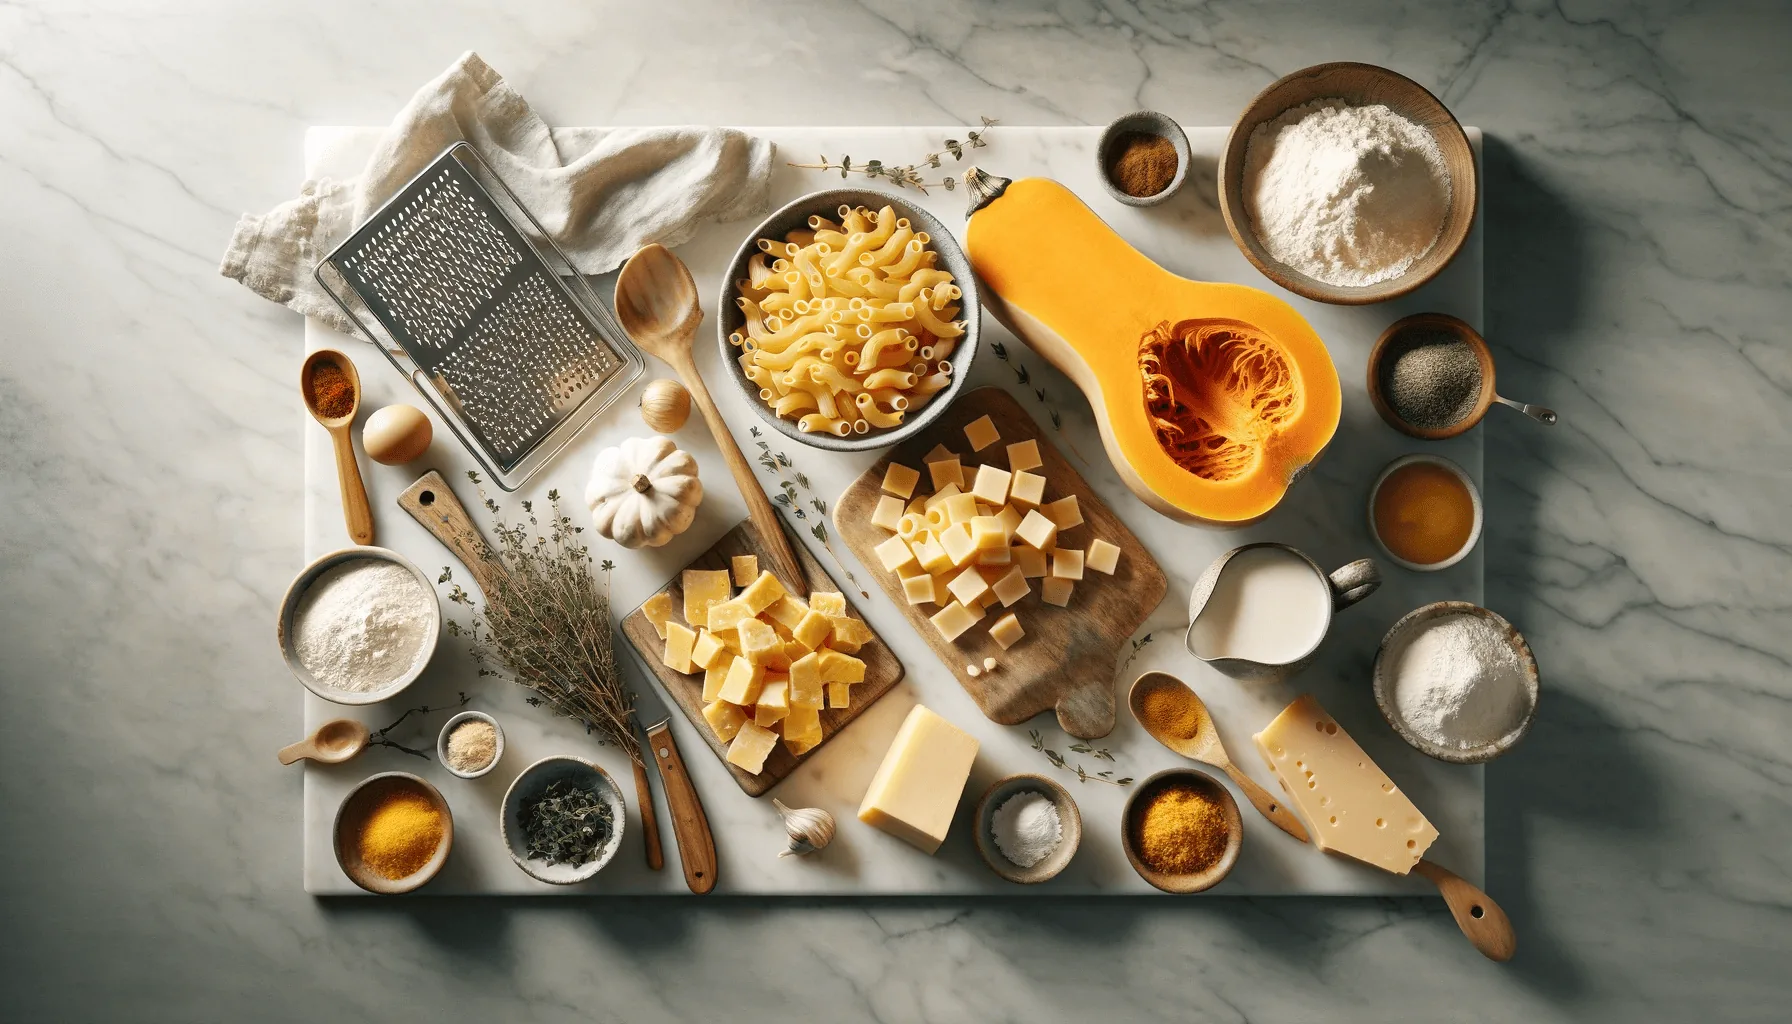 Raw ingredients on a marble countertop with wooden utensils